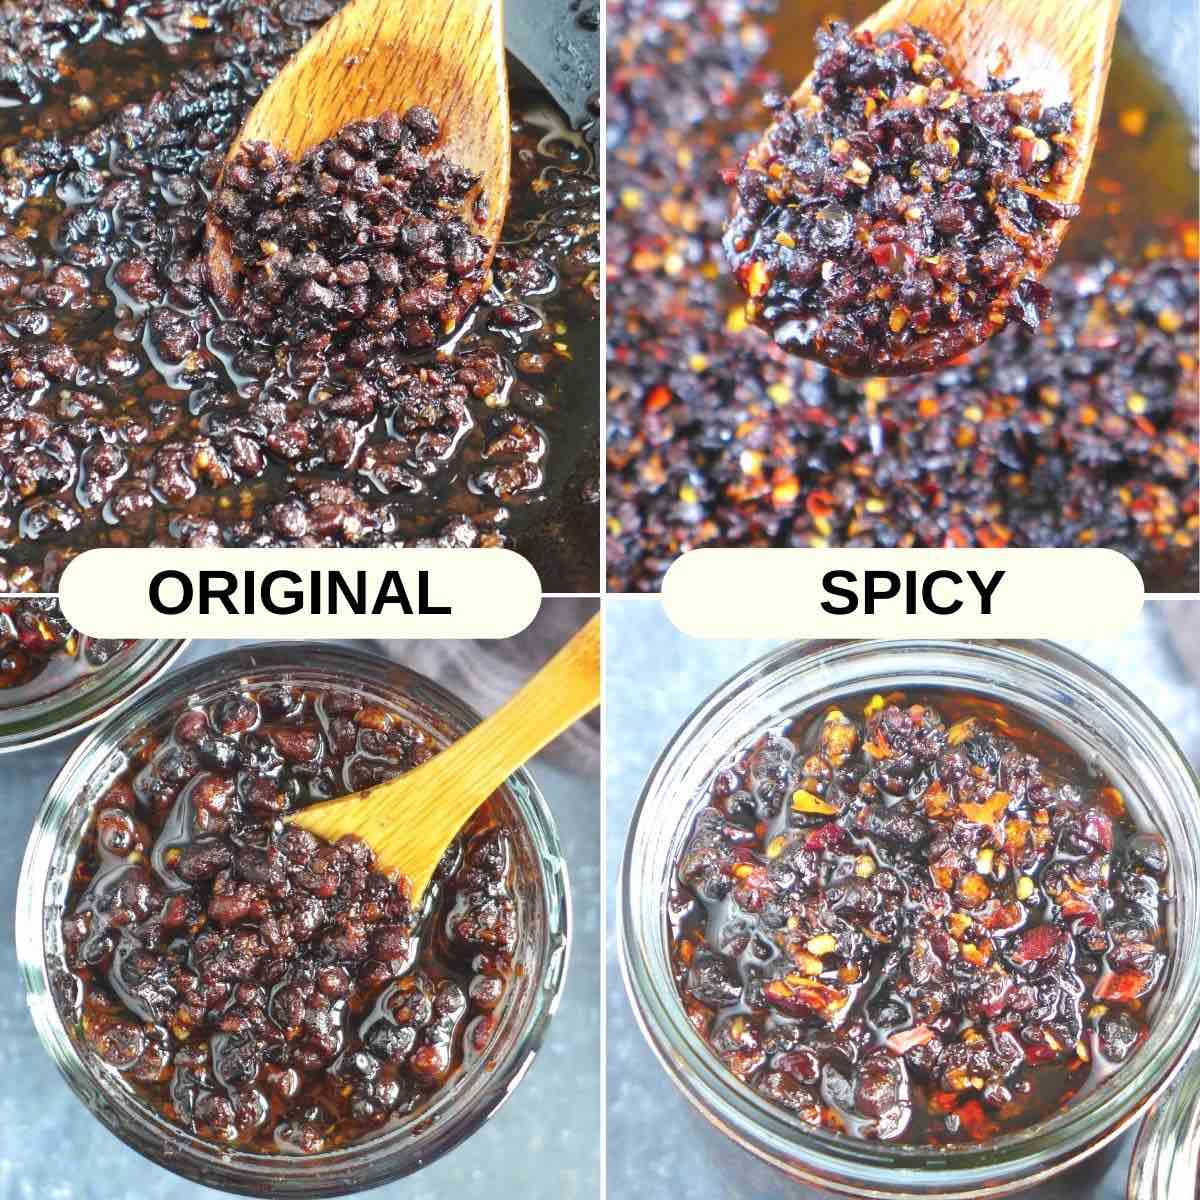 Original and spicy versions of black bean sauce in wok and in jars.